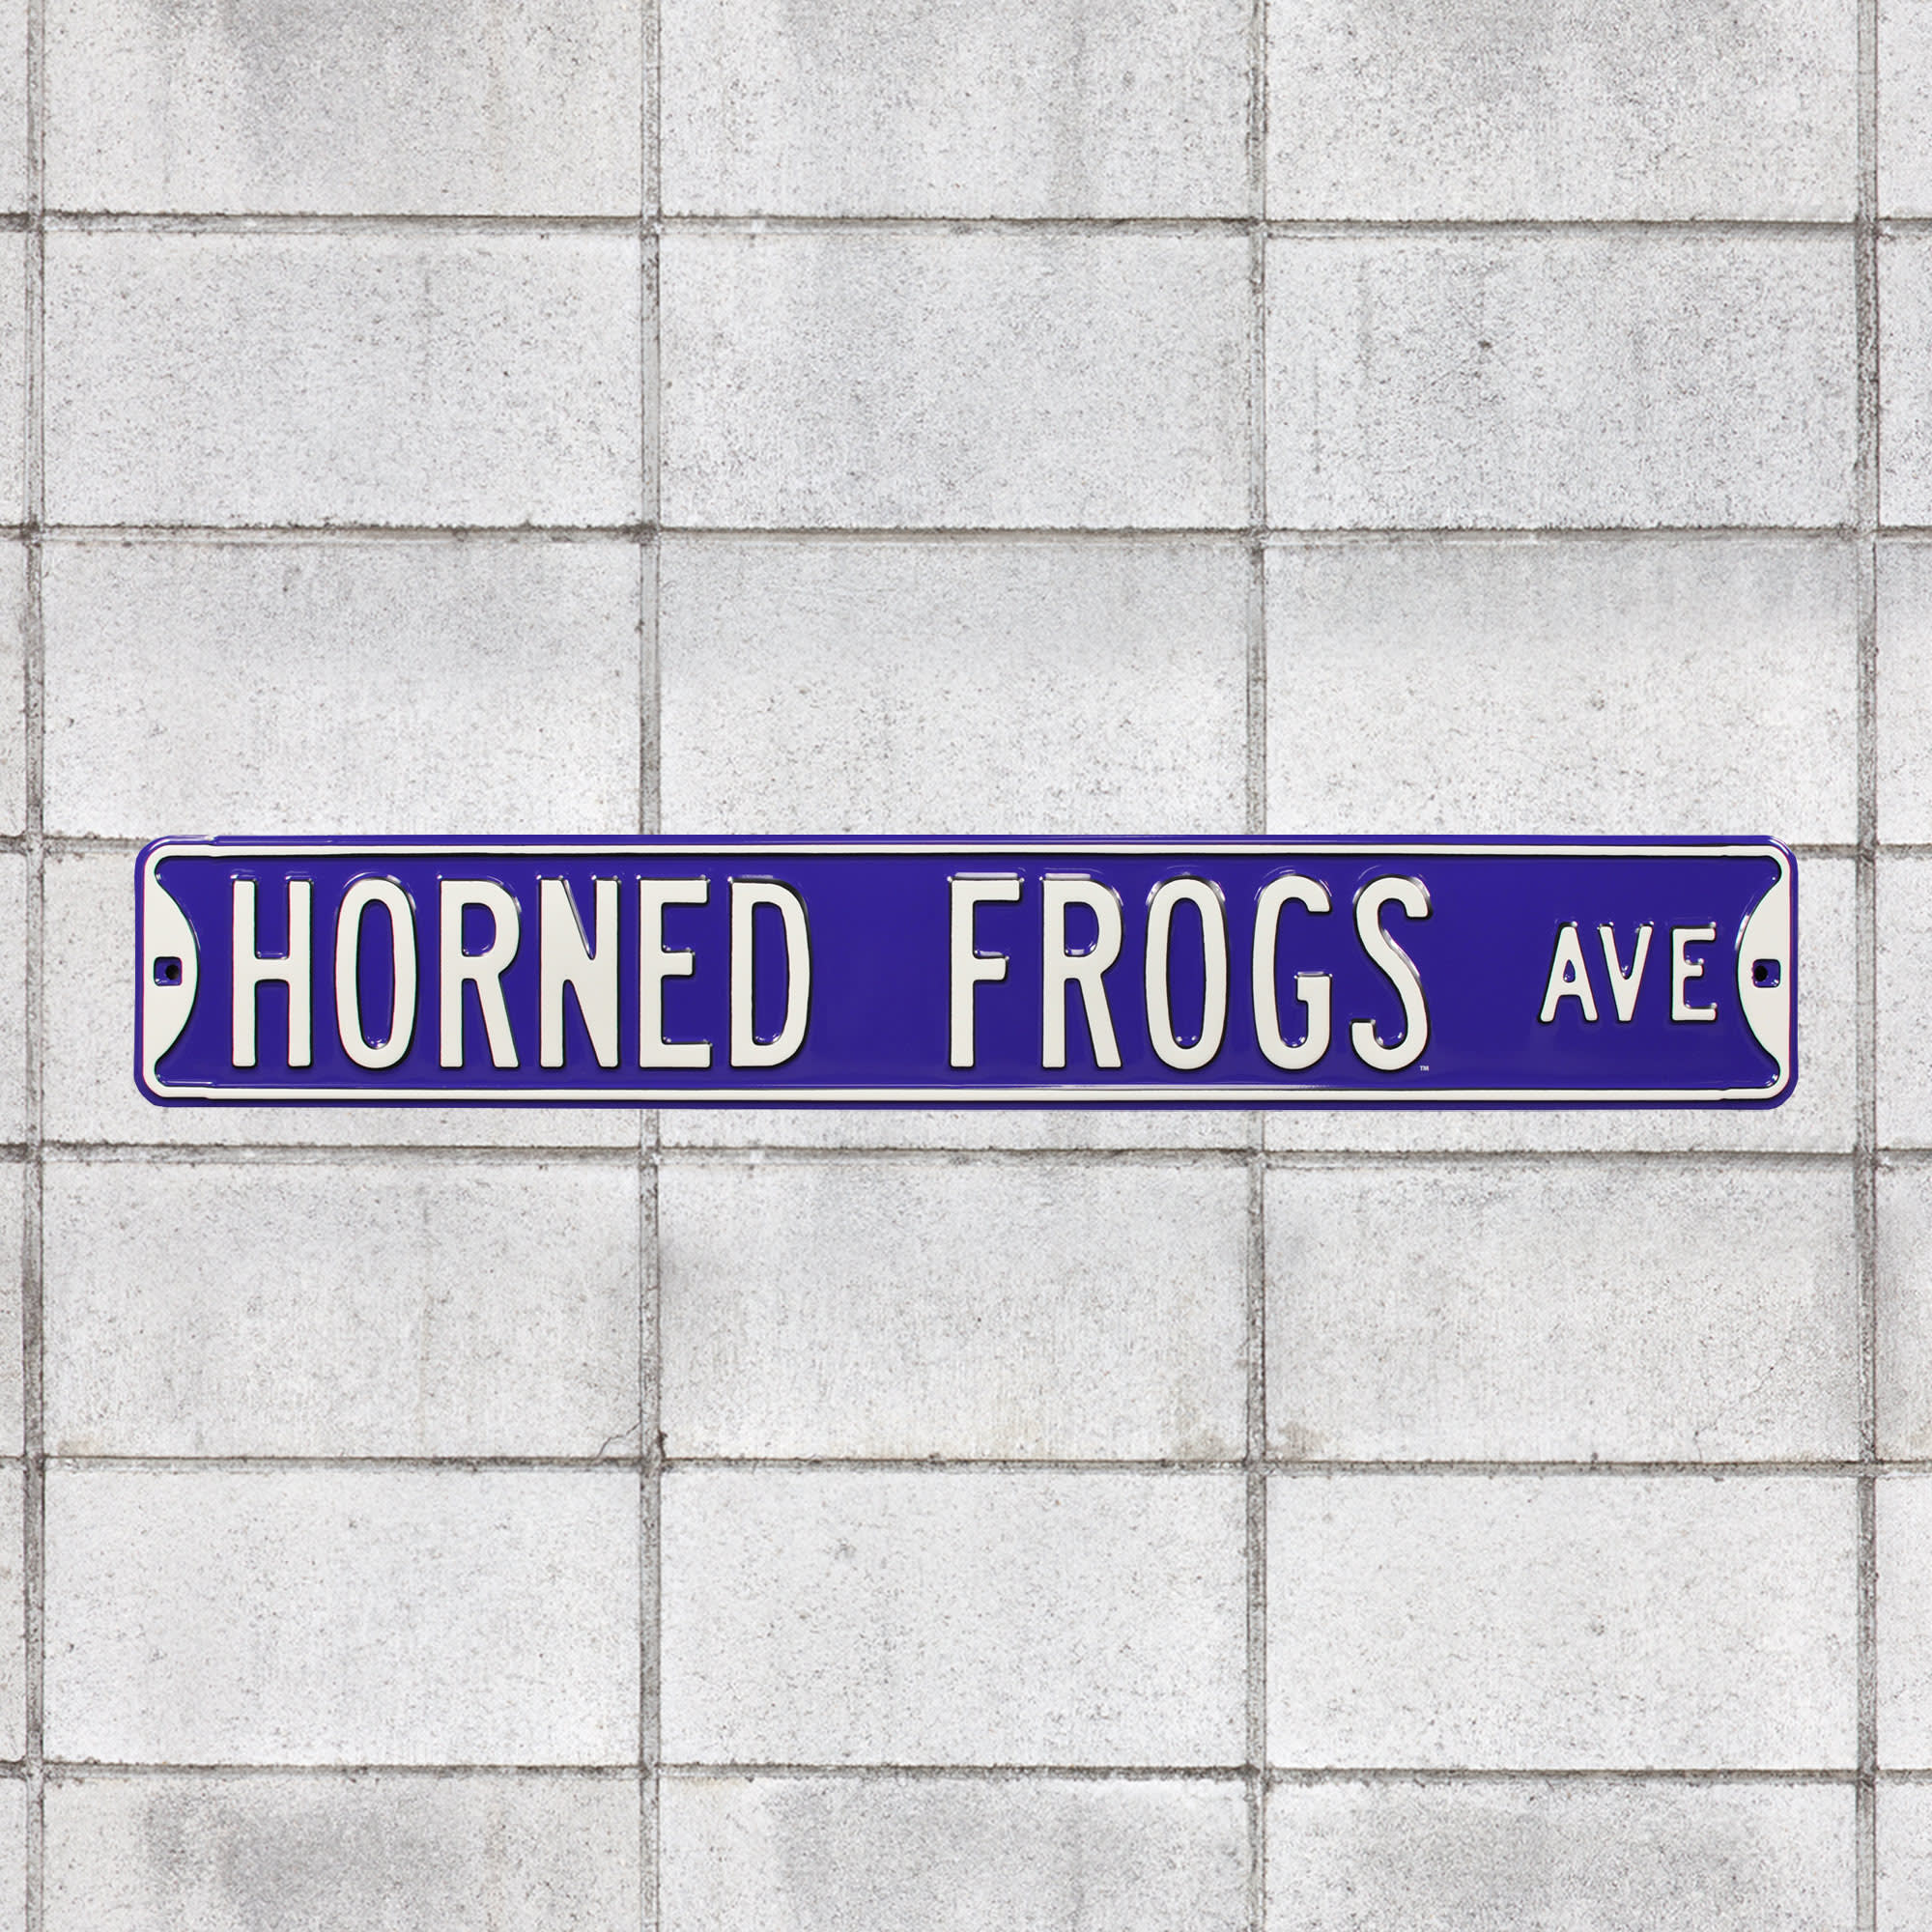 TCU for TCU Horned Frogs: TCU Avenue - Officially Licensed Metal Street Sign 36.0"W x 6.0"H by Fathead | 100% Steel